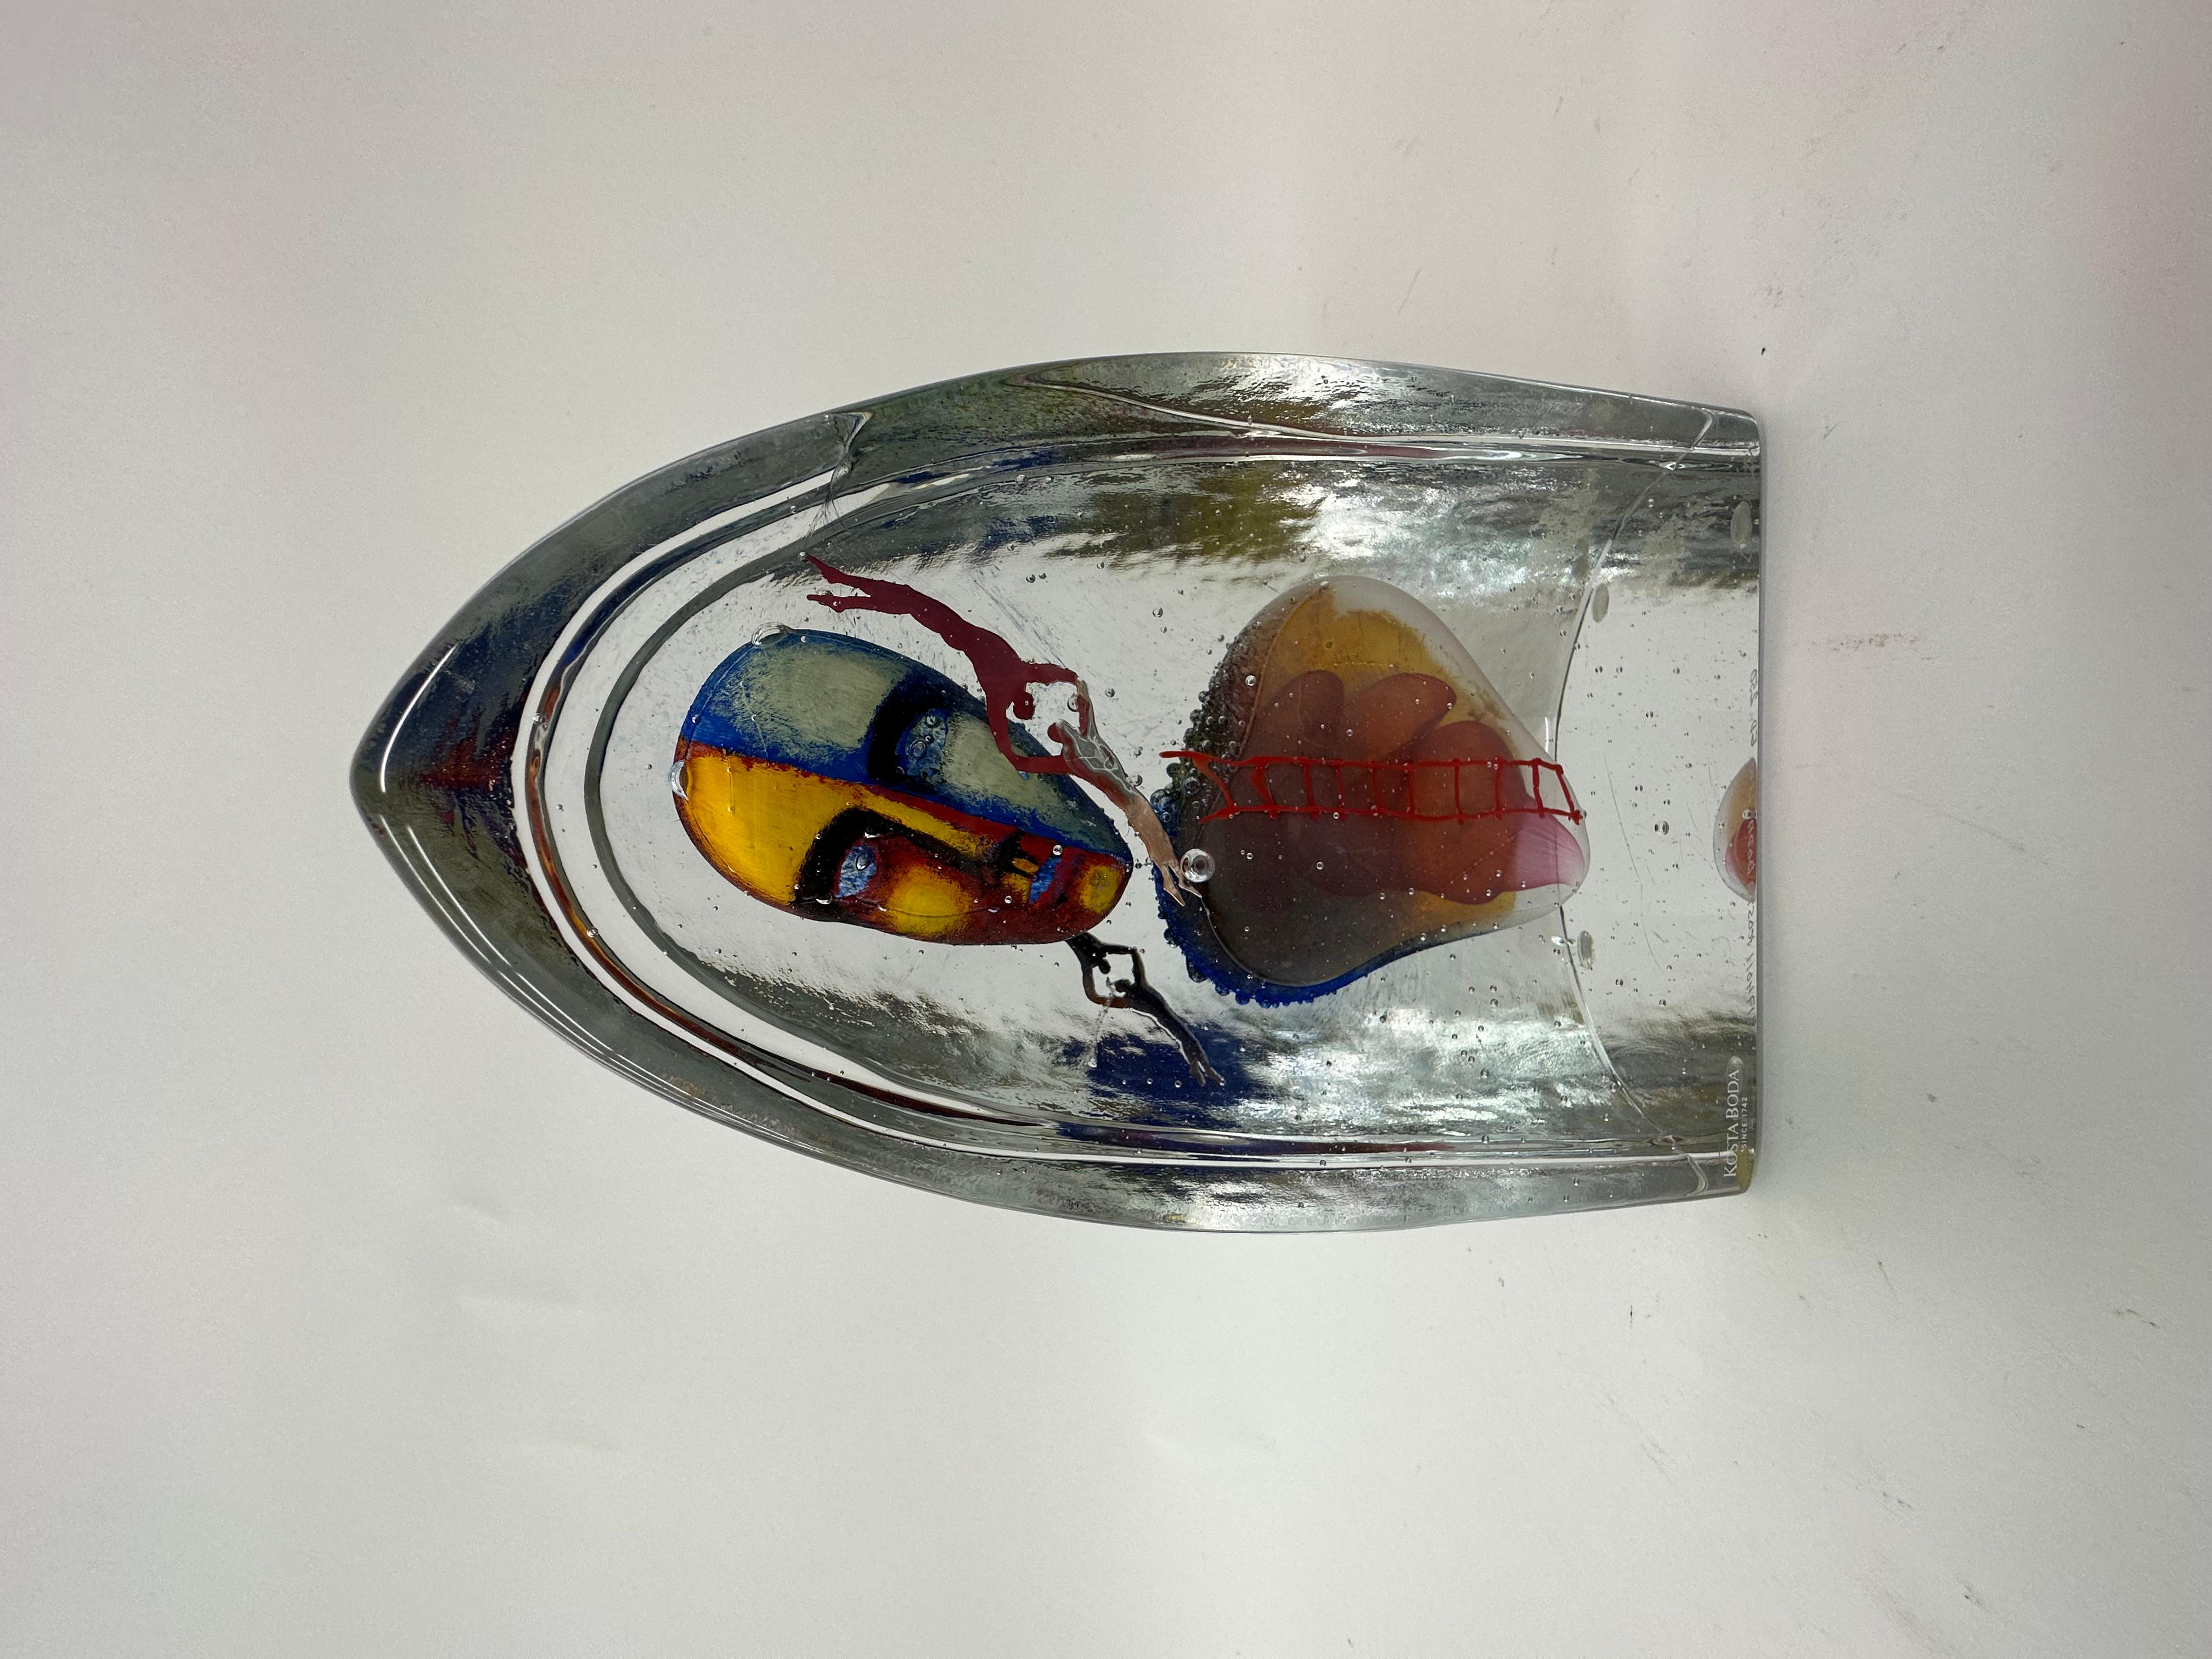 Clear glass with enclosed polychrome decoration of face, heart and two copper figures. Signed  KOSTA BODA Glue. Ed 250, produced in a maximum of 250 copies.
Dimensions: 21 cm H, 14cm W, 9cm D
Condition: Mint